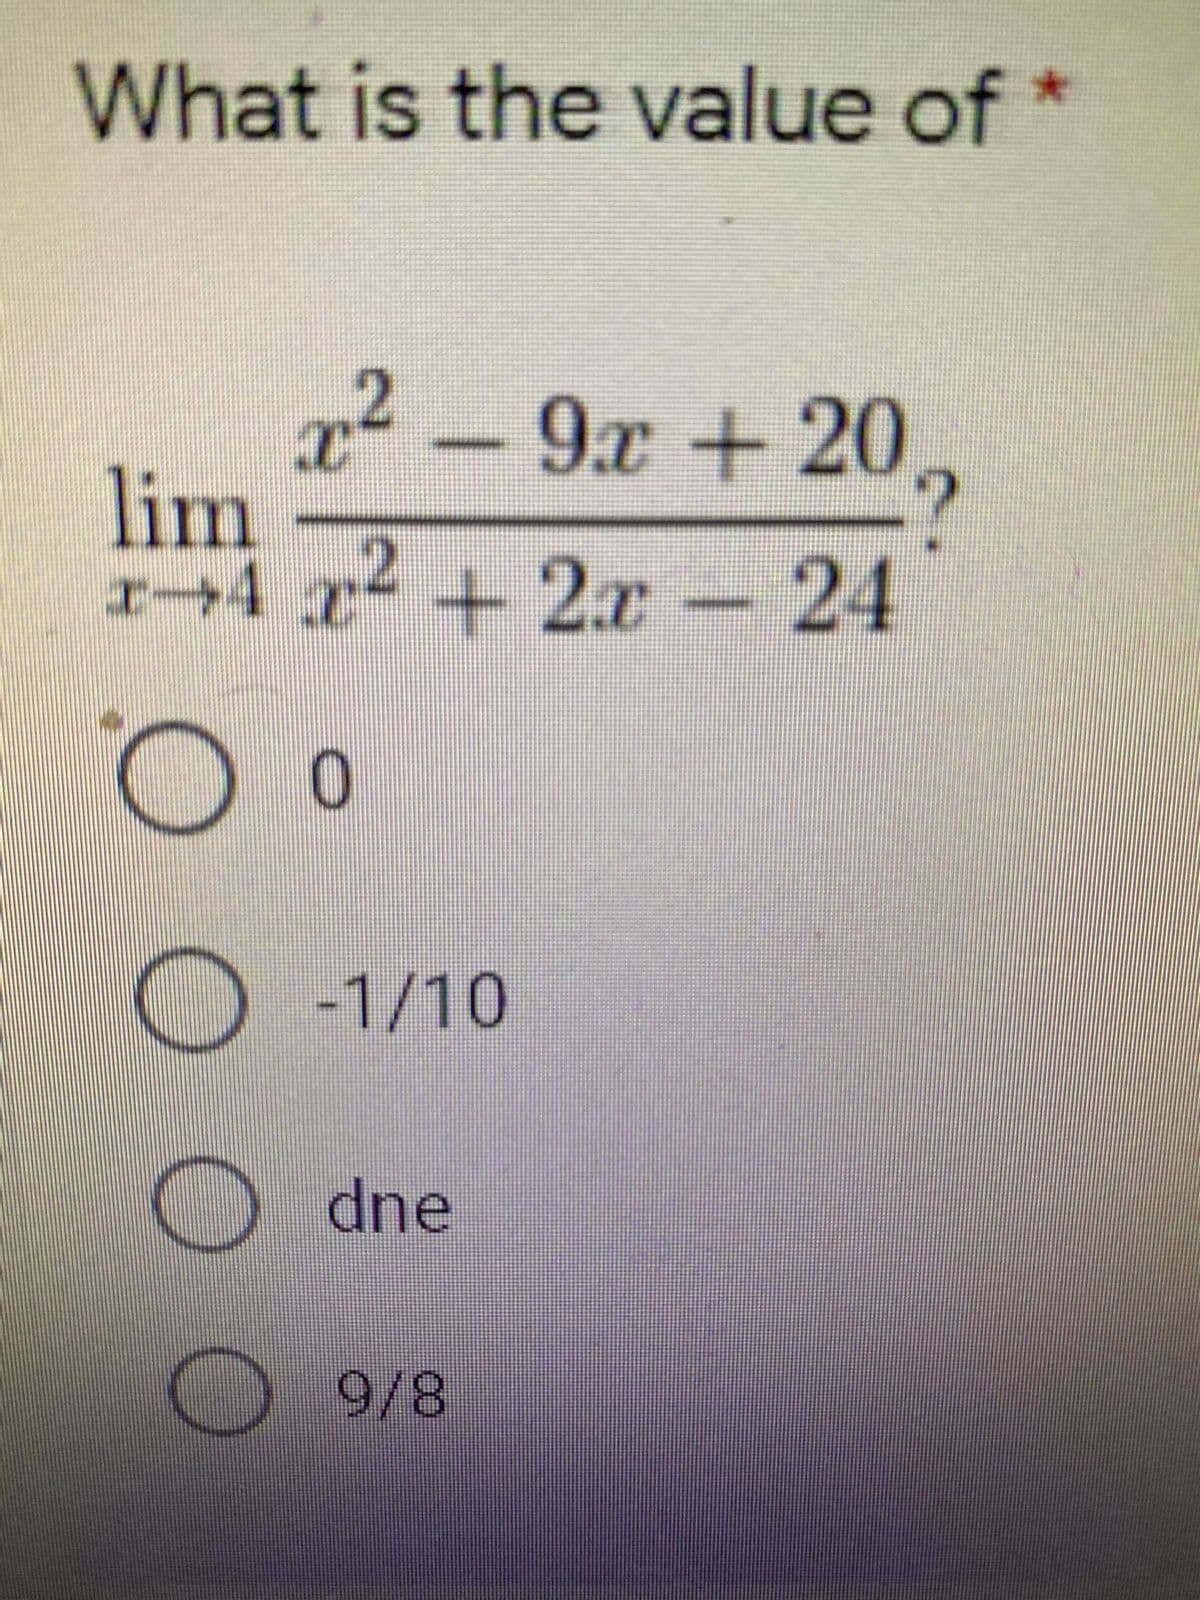 What is the value of *
2 -9x +20,
lim
1-4 x2 +2.x - 24
-1/10
dne
9/8
O O O
